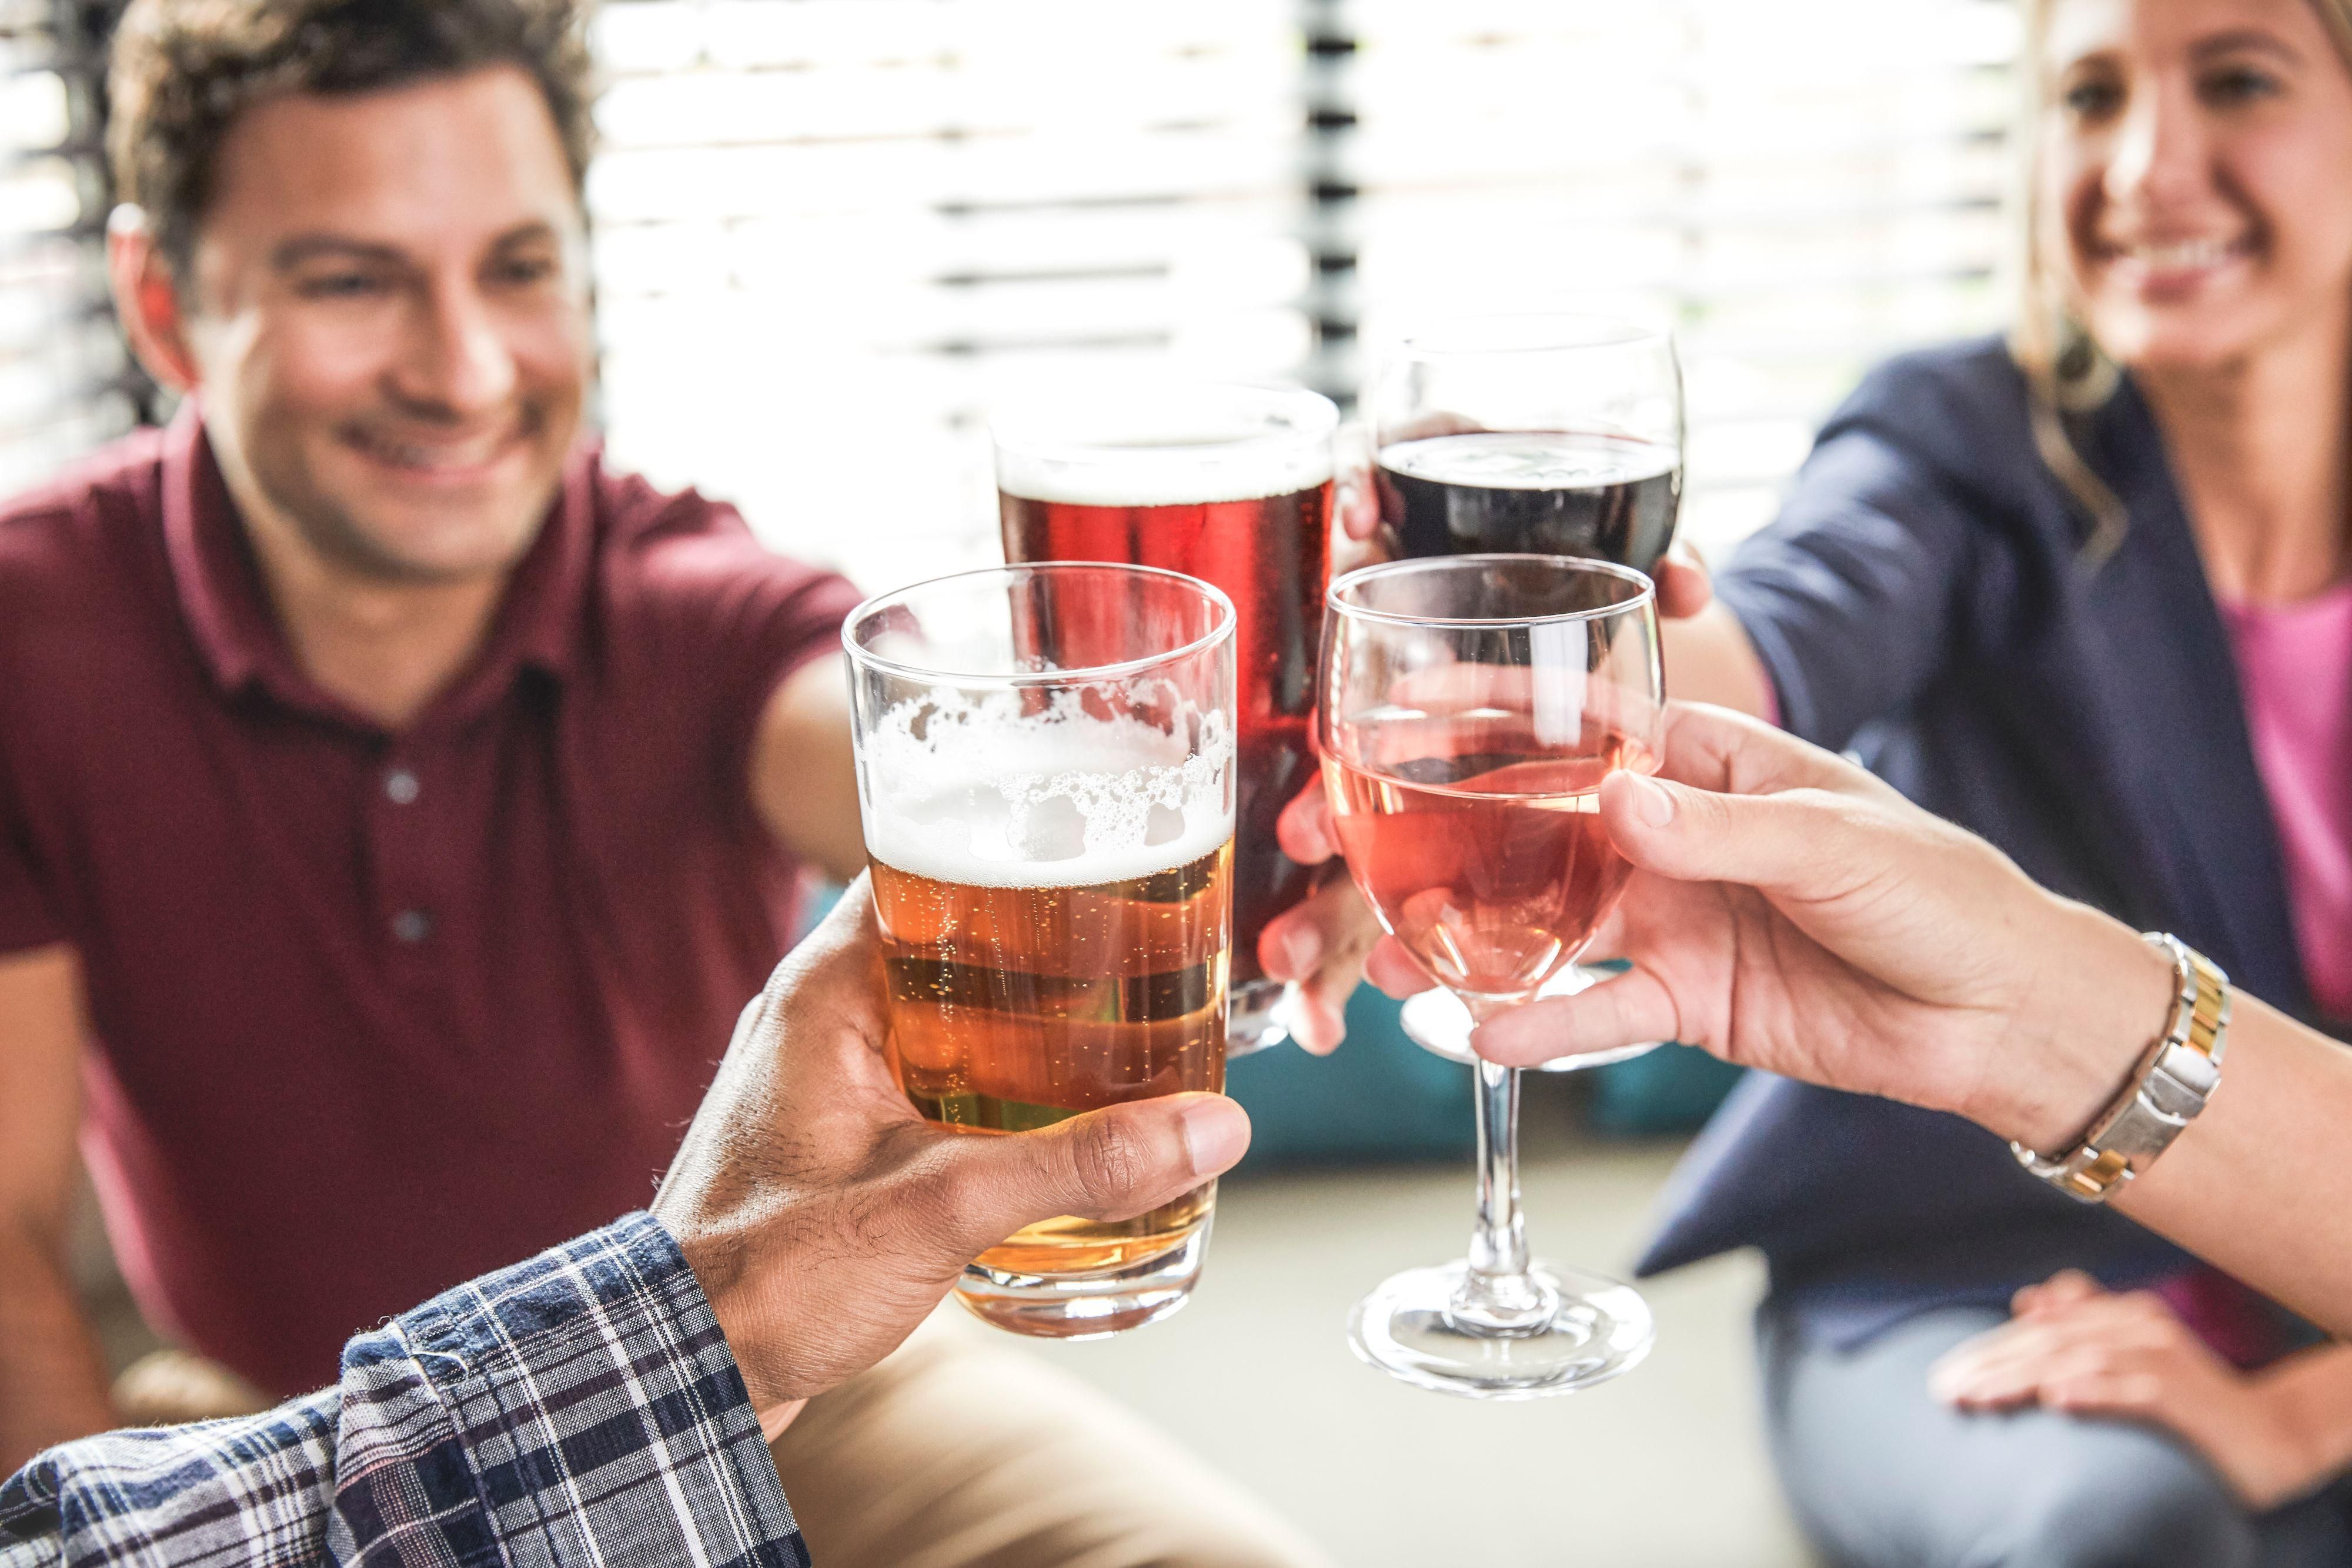 Get social and meet new guests at our weekly social hour held every Monday through Wednesday from 5:30 PM to 7:00 PM. Join us for complimentary drinks and appetizers in the lobby. Network, mingle, and make new friends in our friendly Staybridge extended-stay community. 